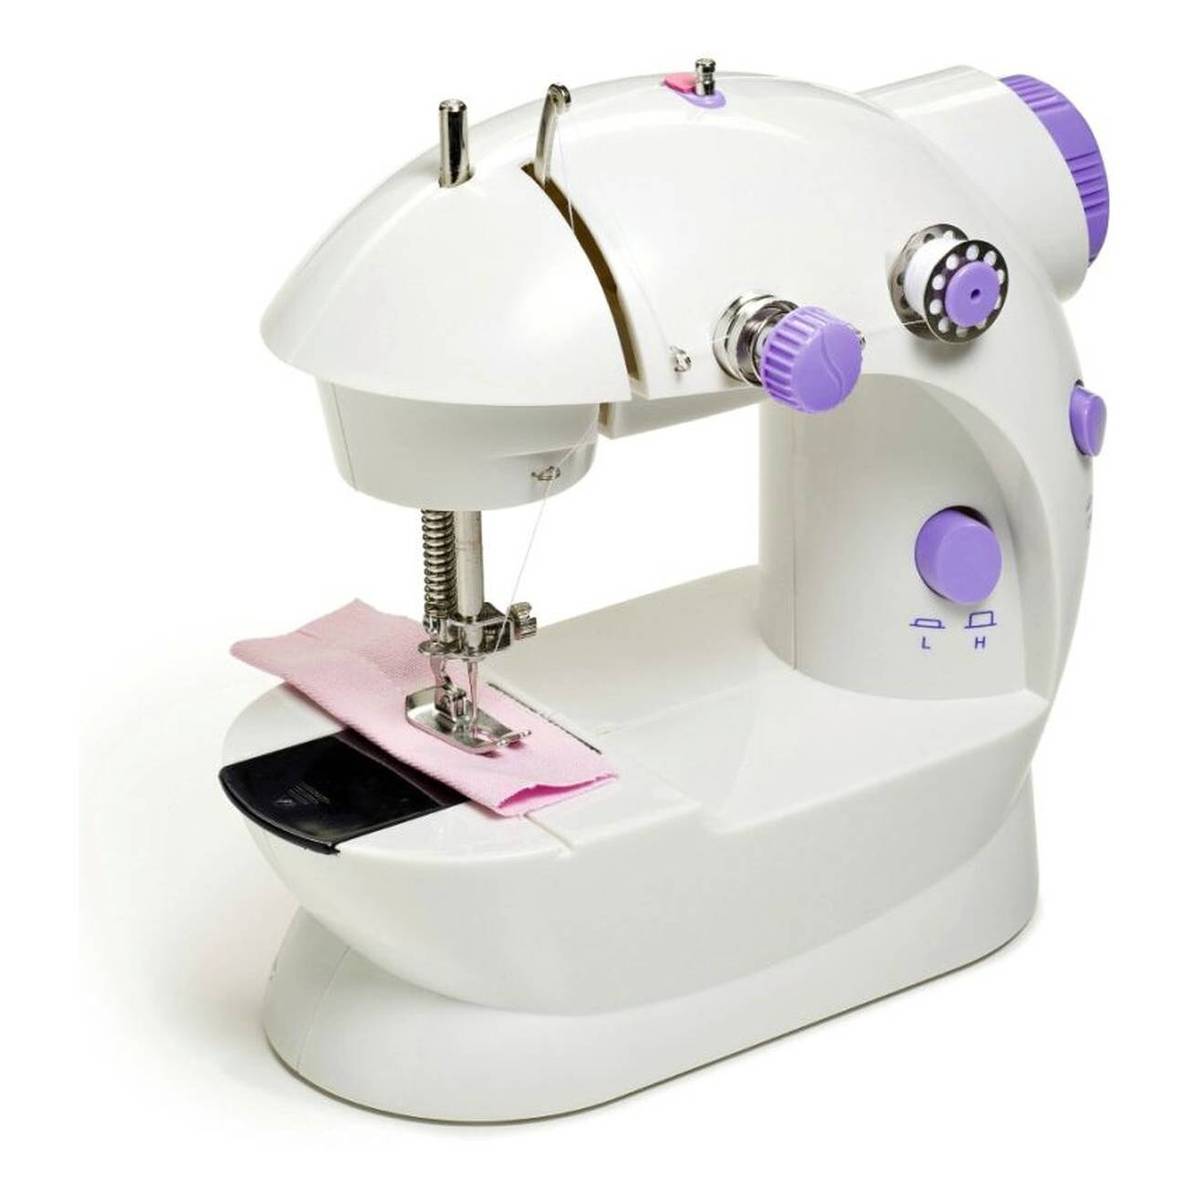 Bobbins Desktop Sewing Machine Mini Electric Handheld Sewing Machine Kit Tools Needle Threader Ideal for Kids Beginners Household Lightweight Portable Sewing Device Kit with Foot Pedal 